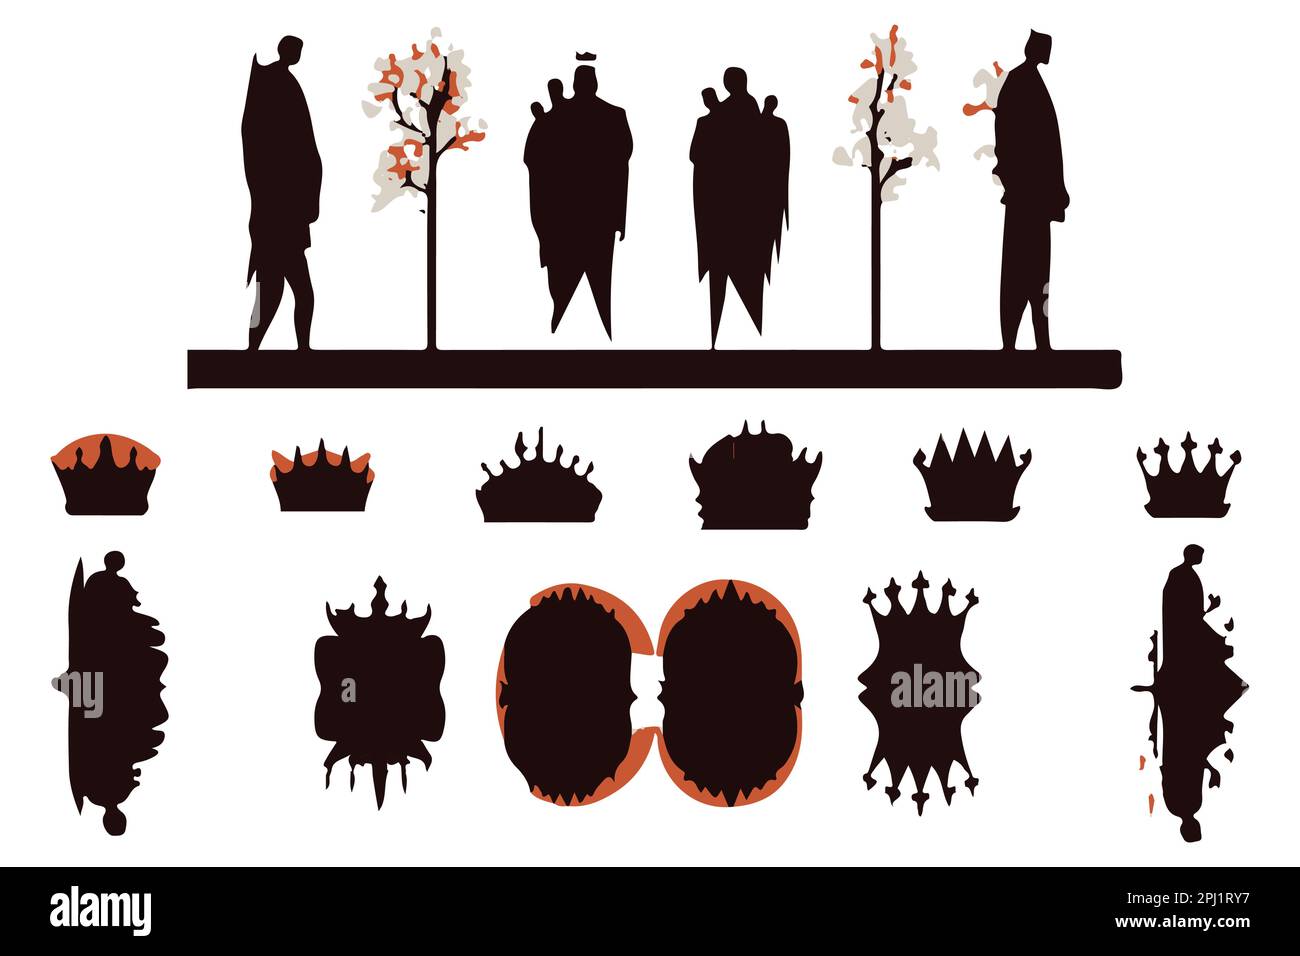 king silhouette vector